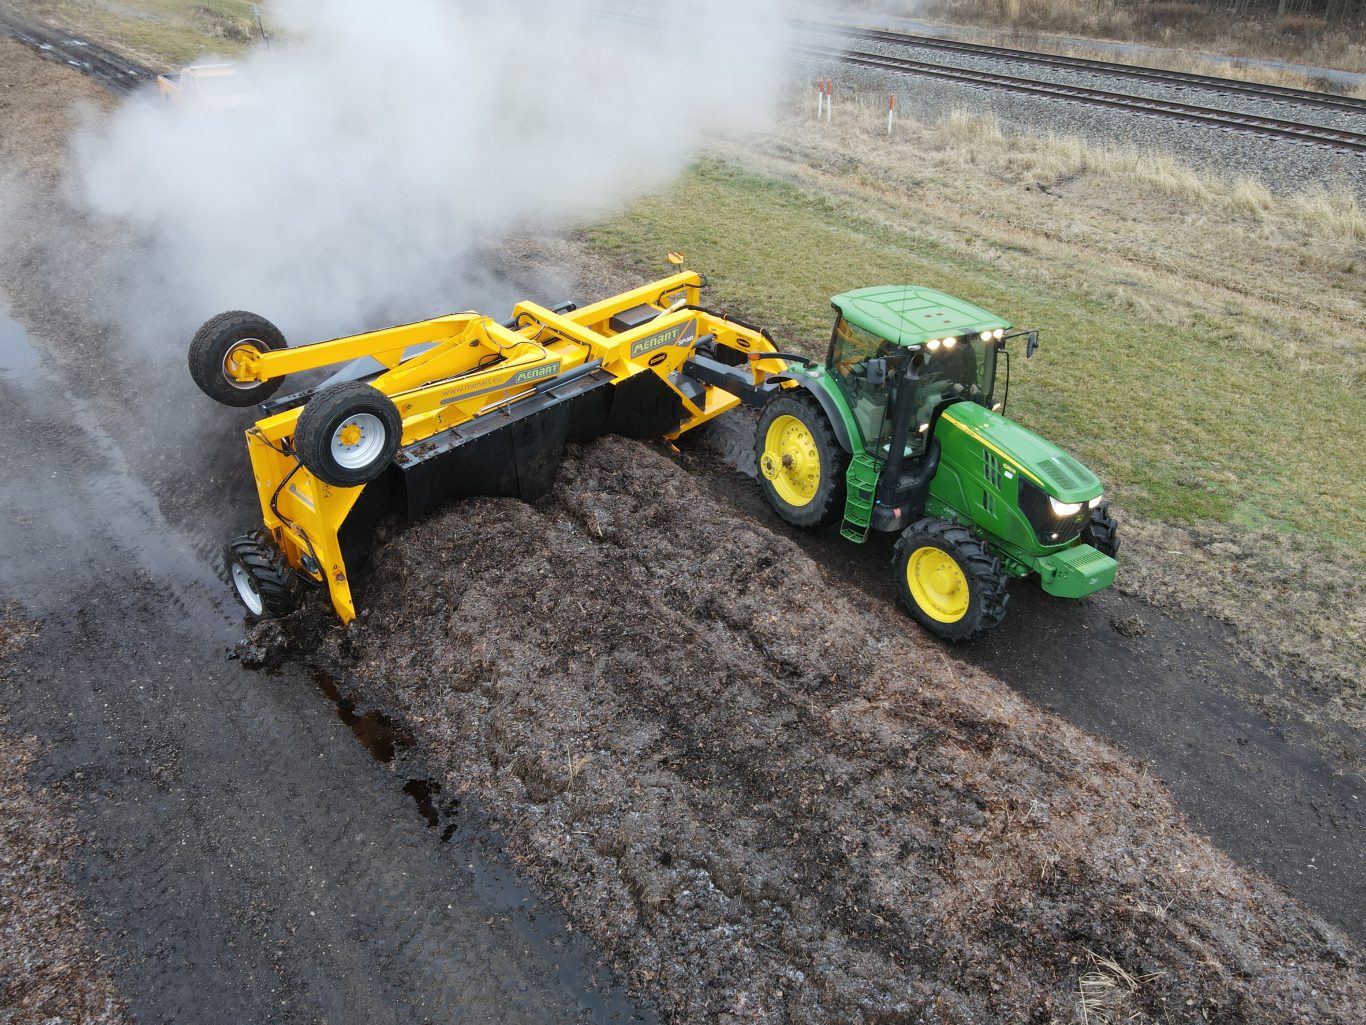 A tow-behind compost turner is ideal for processing agricultural waste.